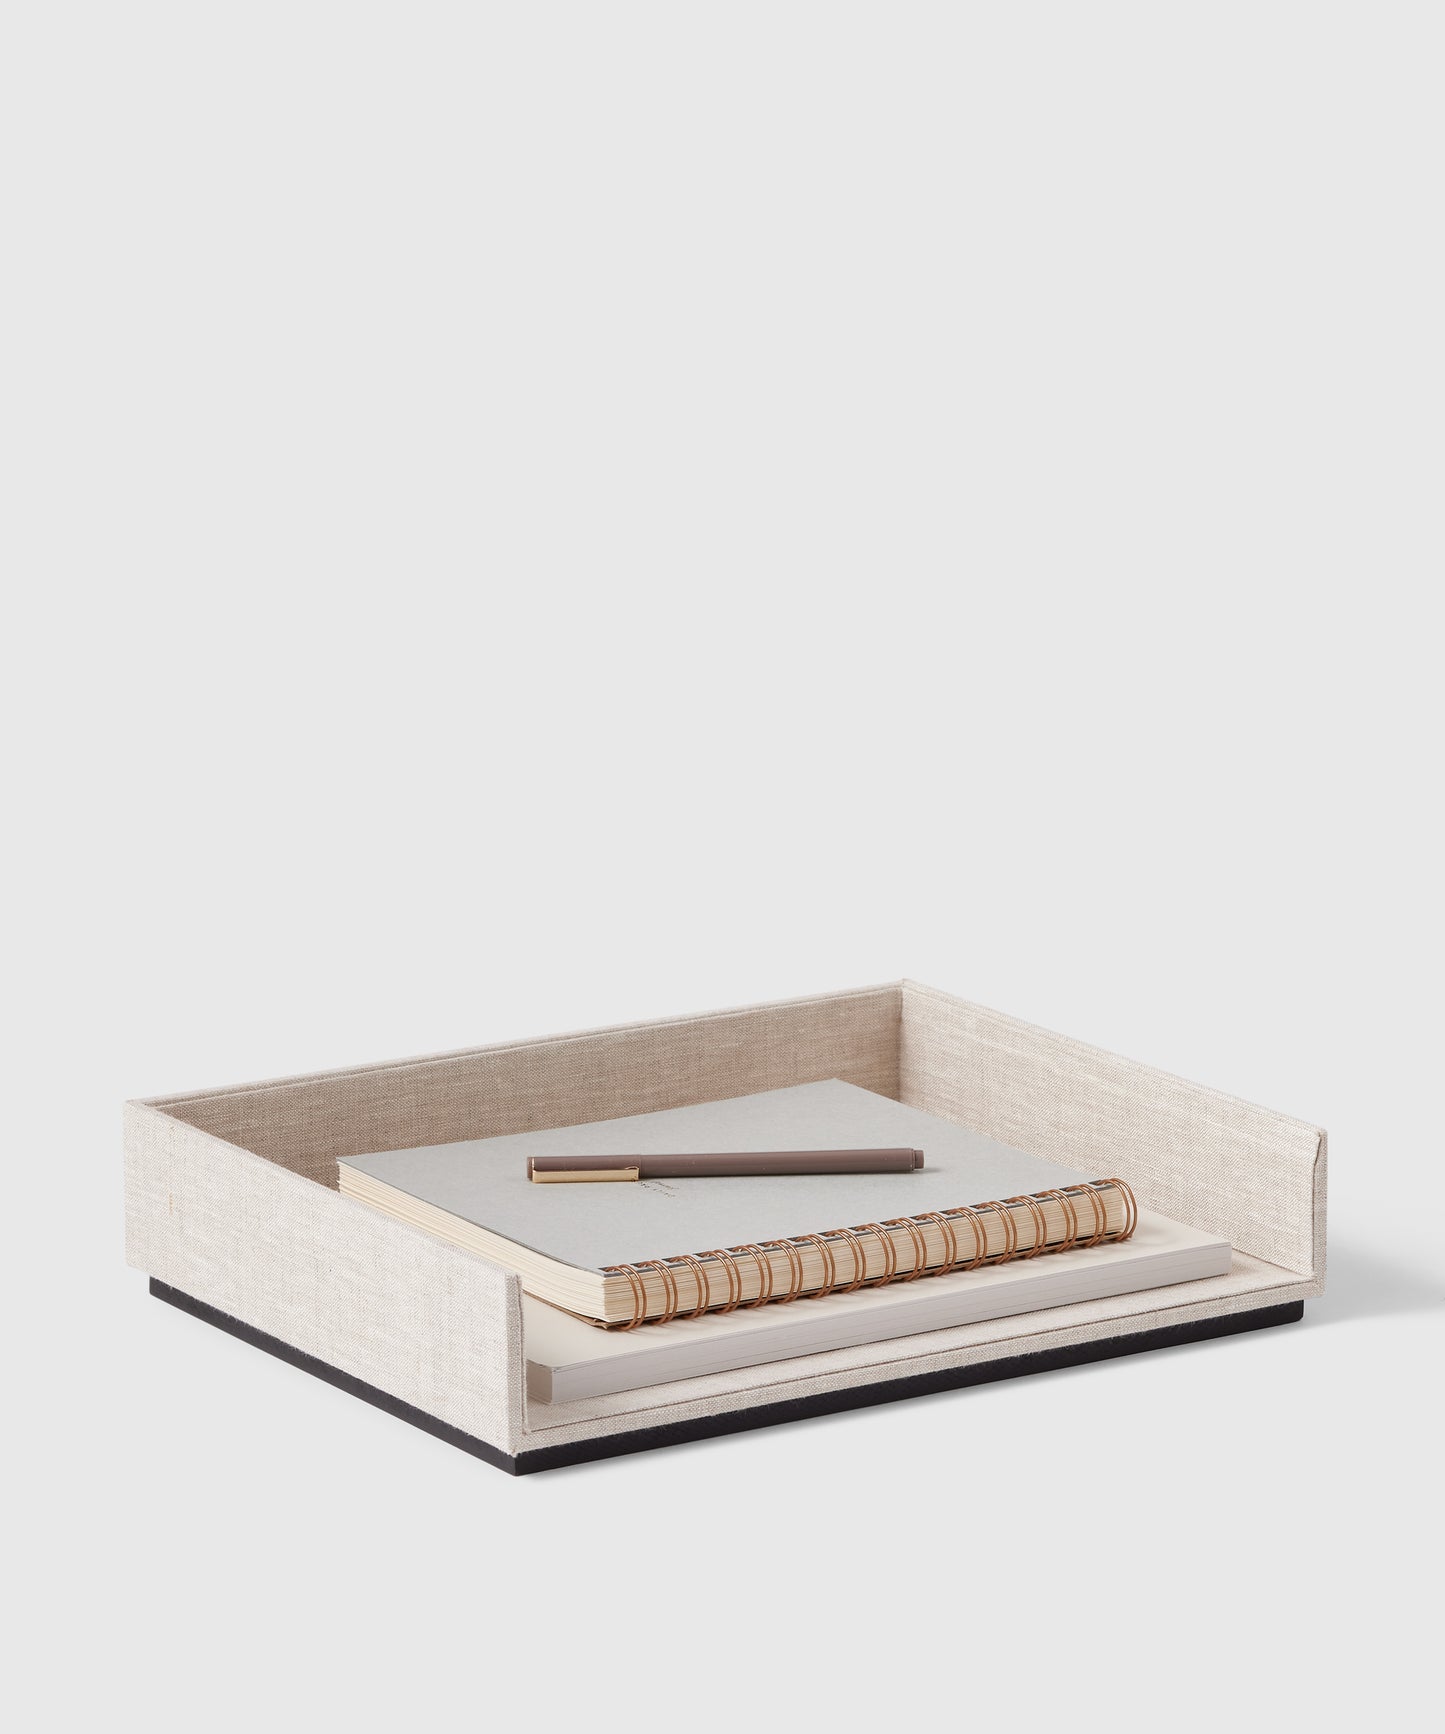 Stackable Linen Letter Tray | The Container Store x KonMari